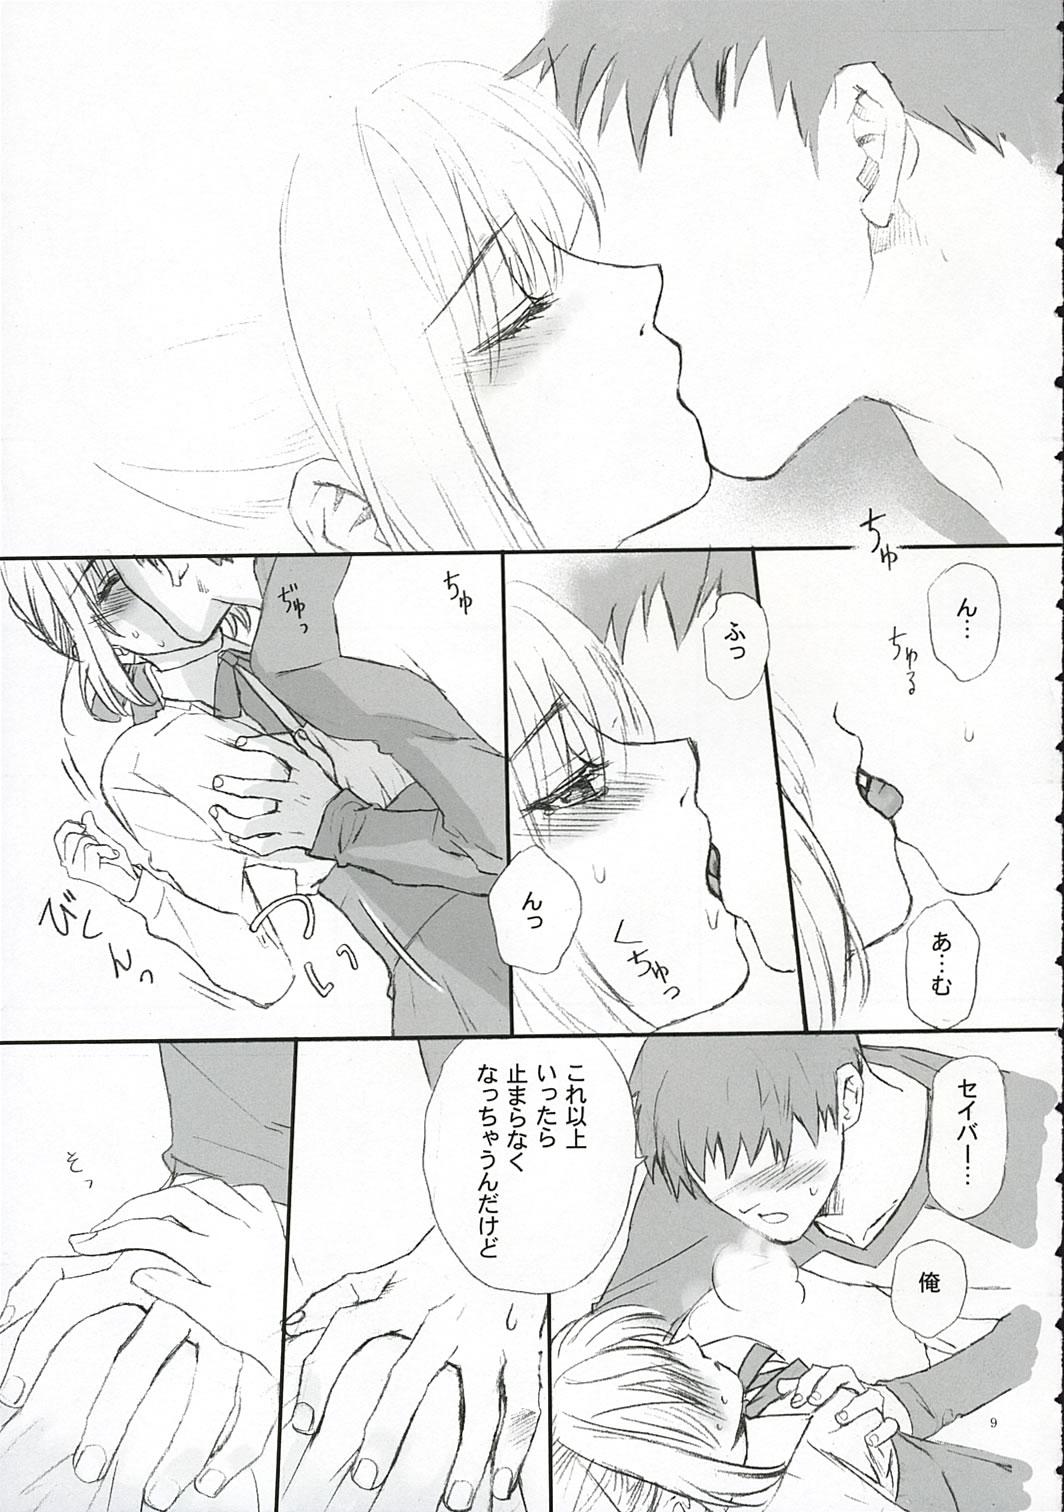 Milf Cougar Love Soulful - Fate stay night Stepfather - Page 8